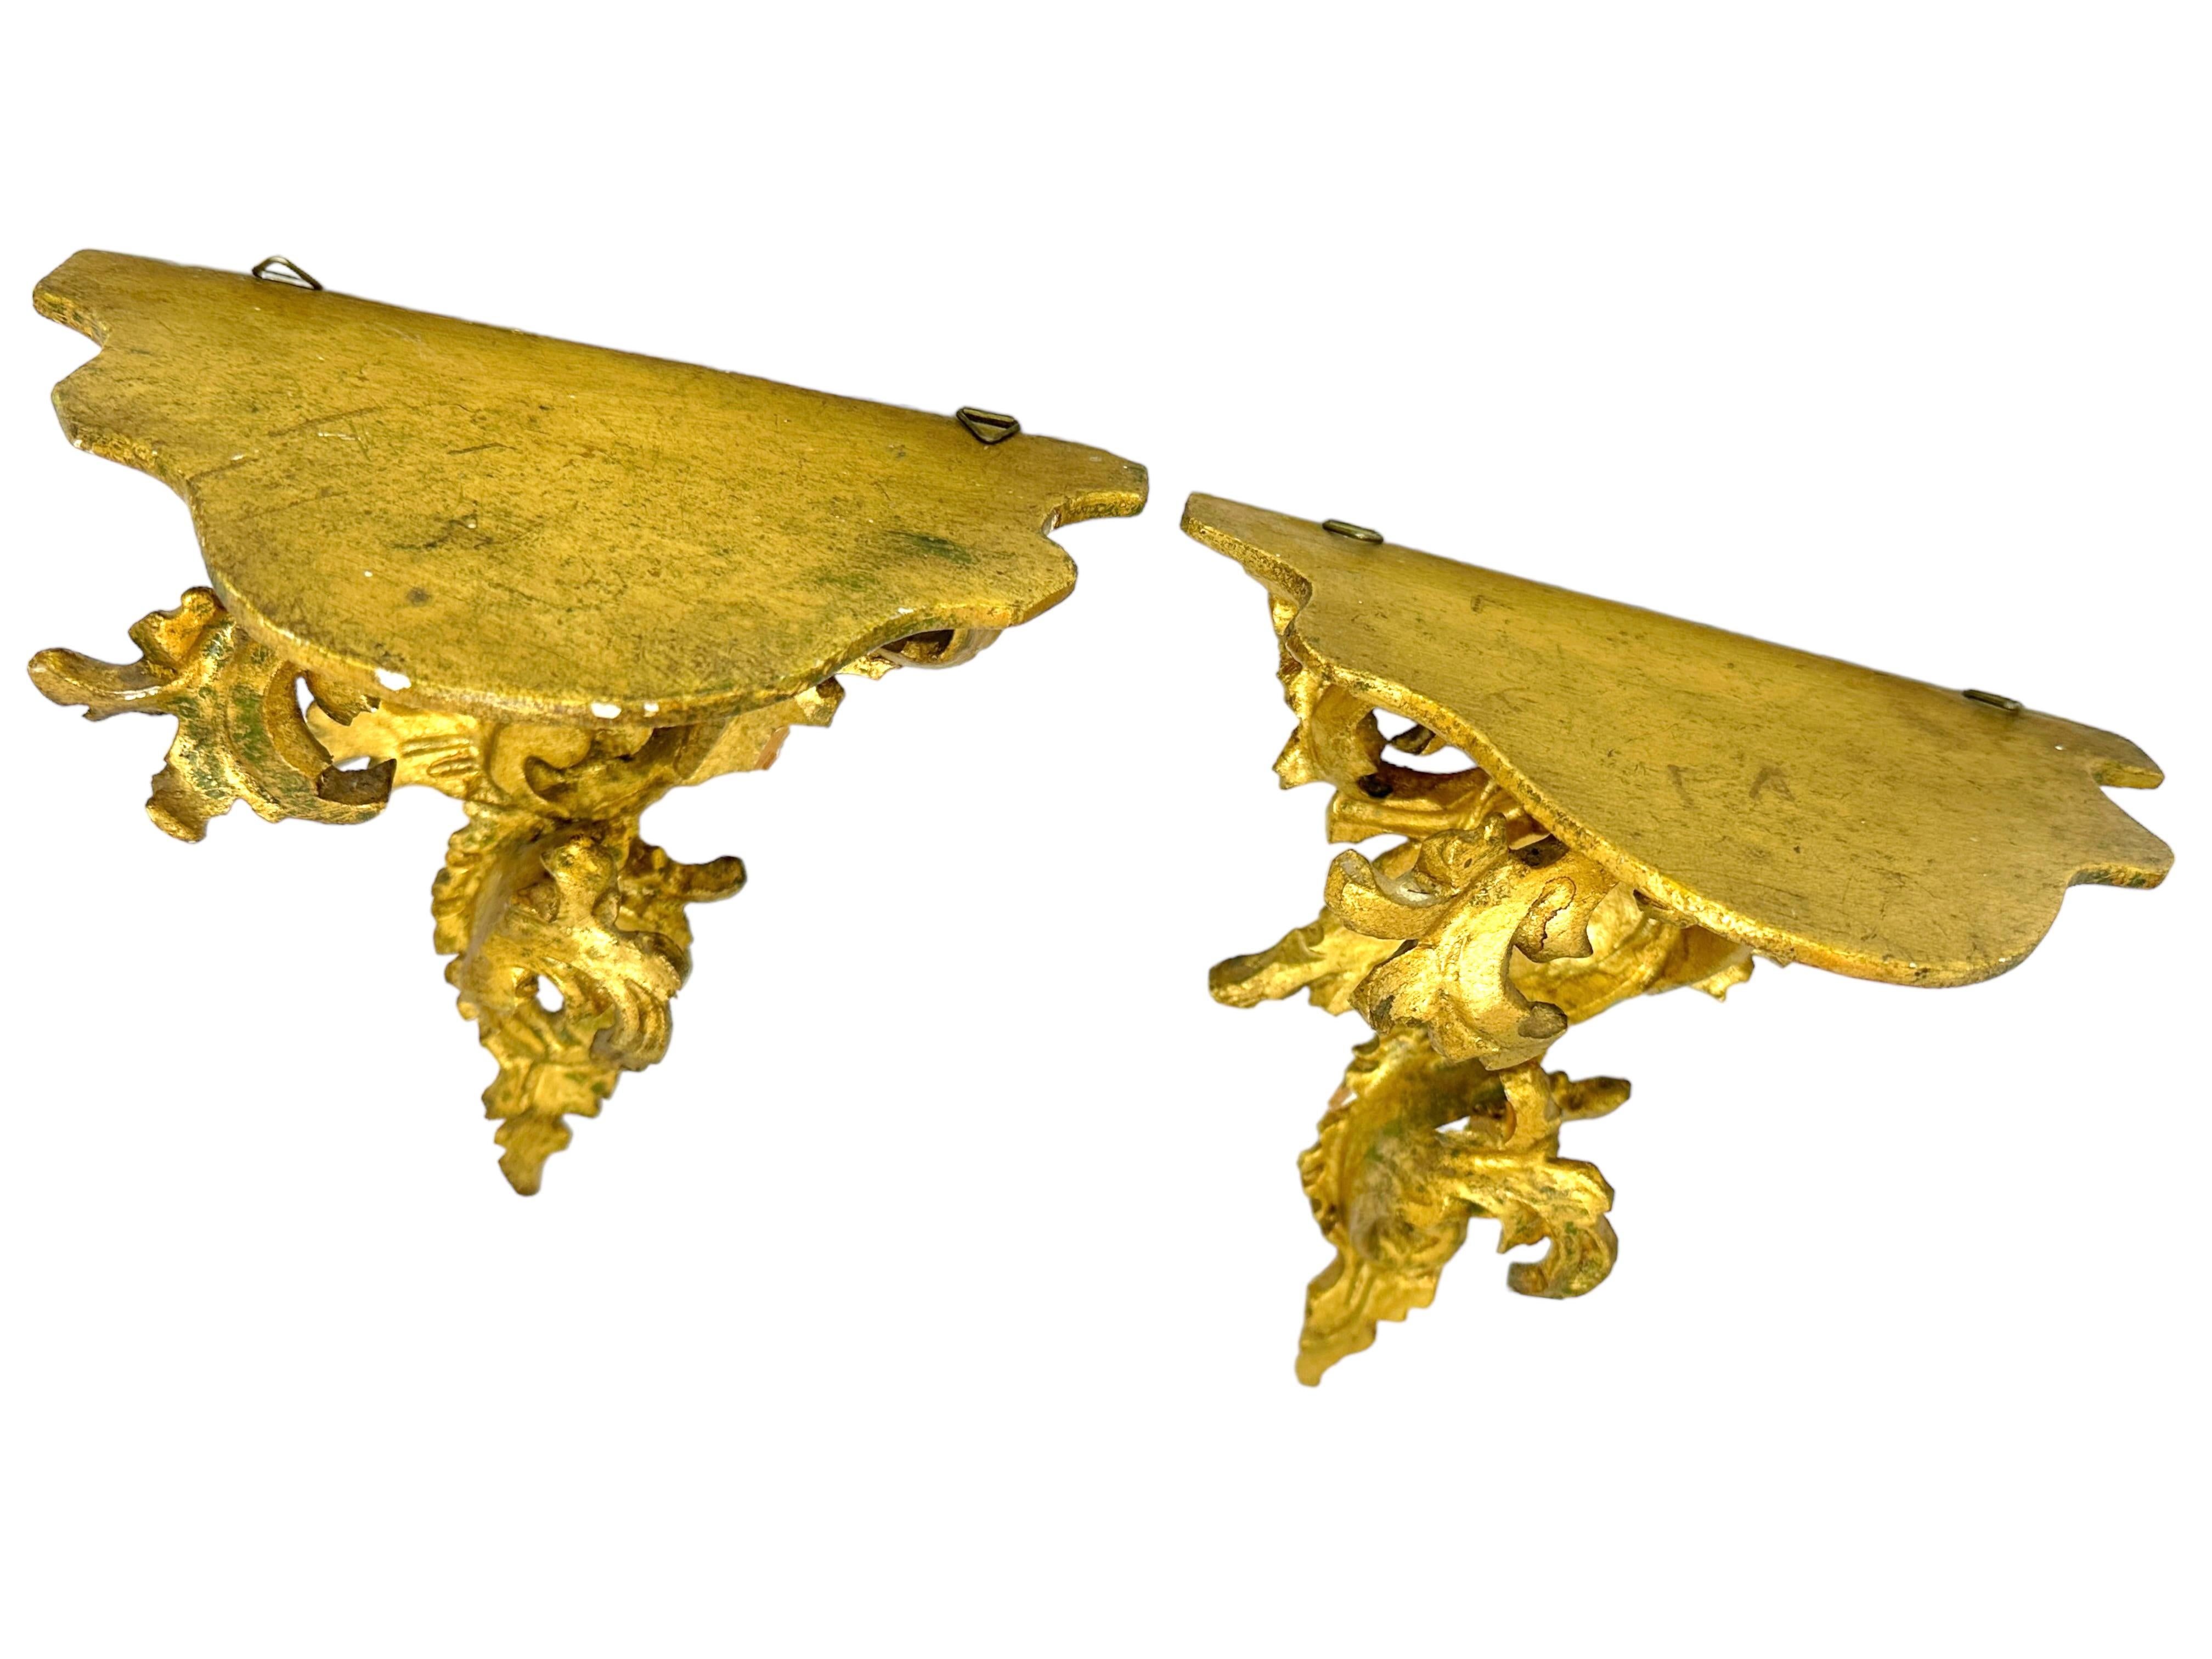 Pair of Italian Old Venetian Wall Shelf, Gilded Carved Acanthus, Rococo Style For Sale 1